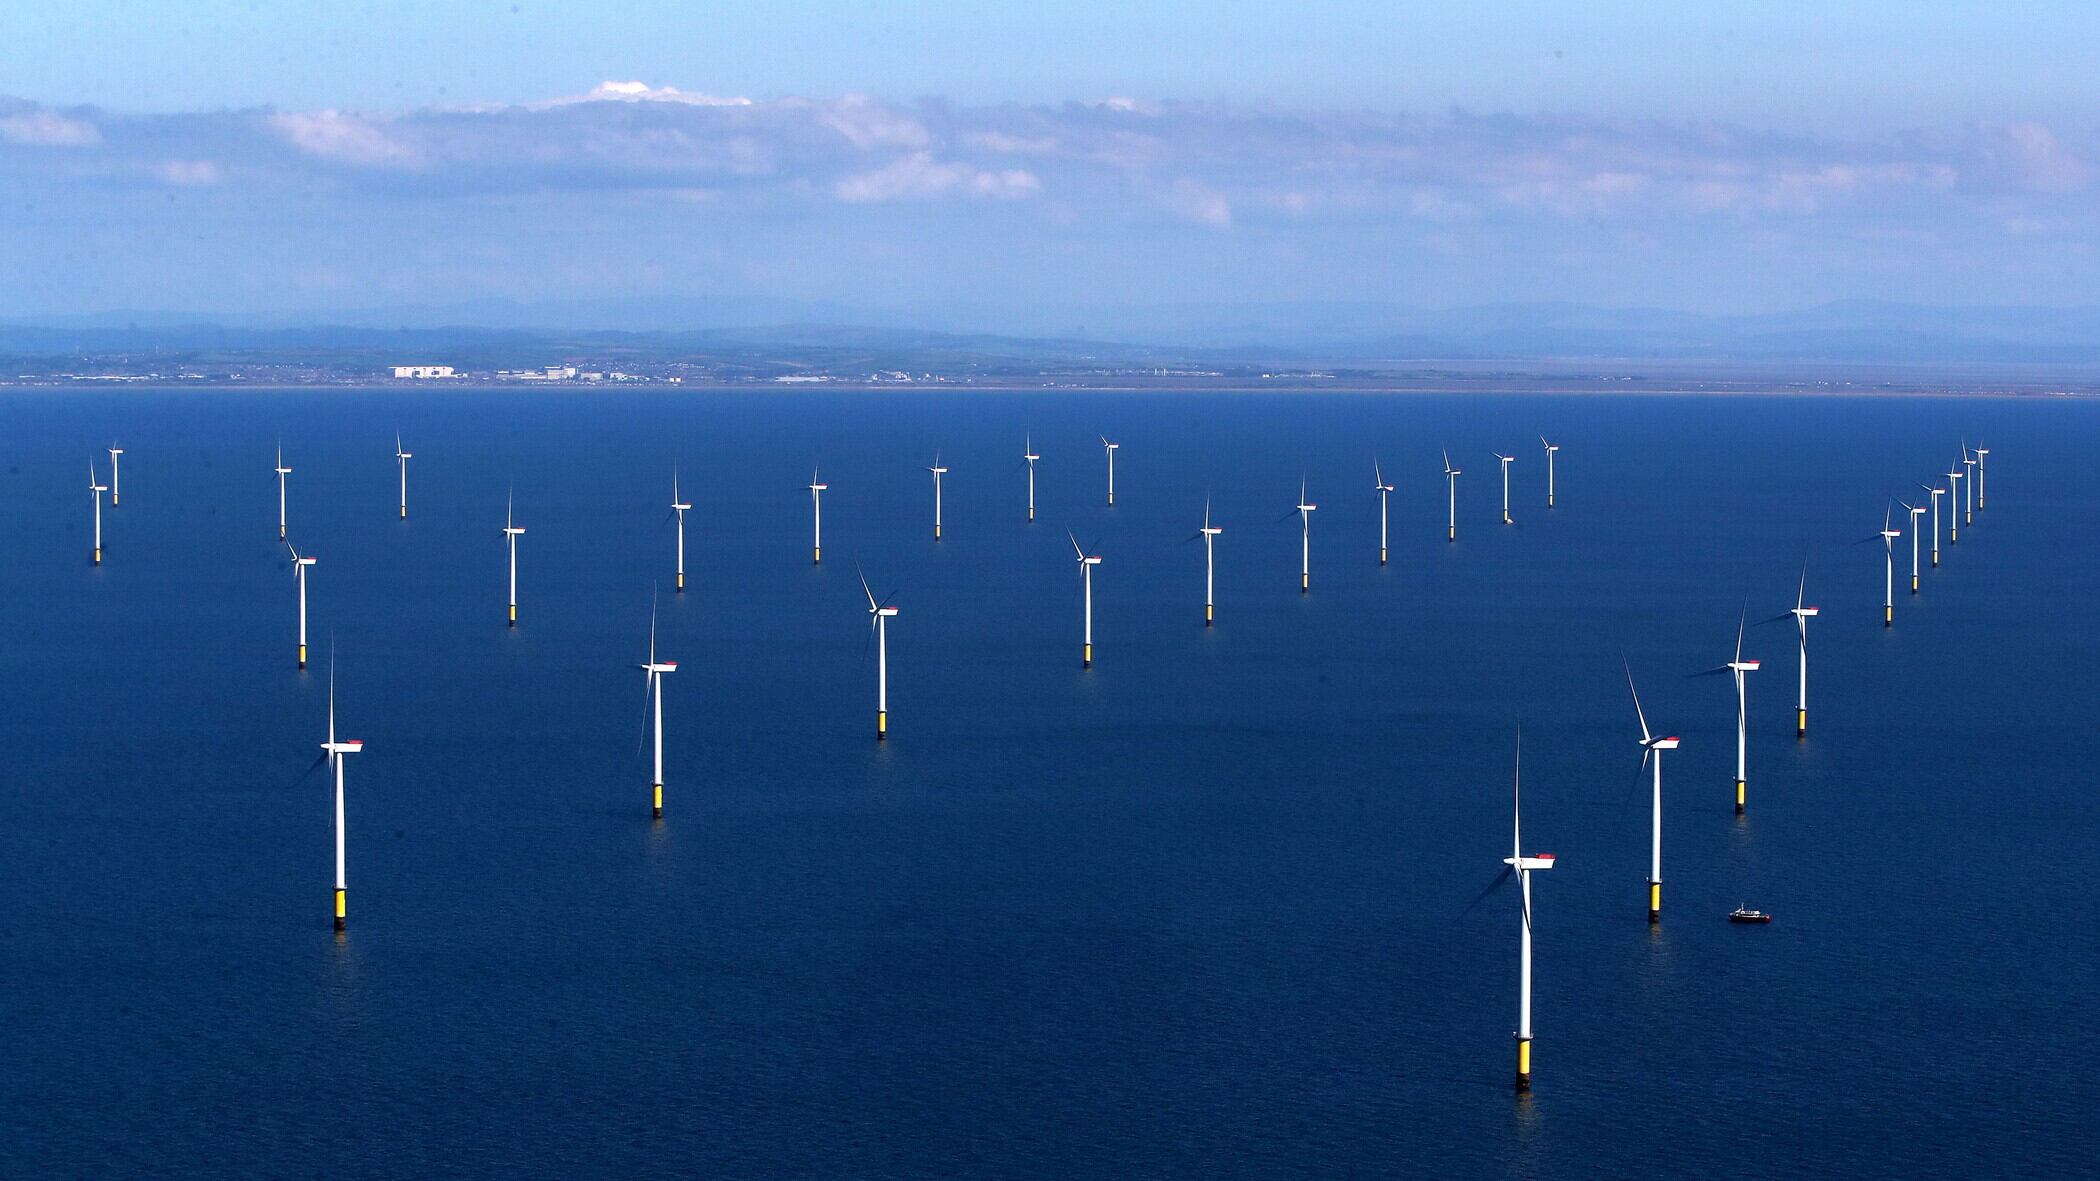 The Dogger Bank wind farm – the largest of its kind in the sea 